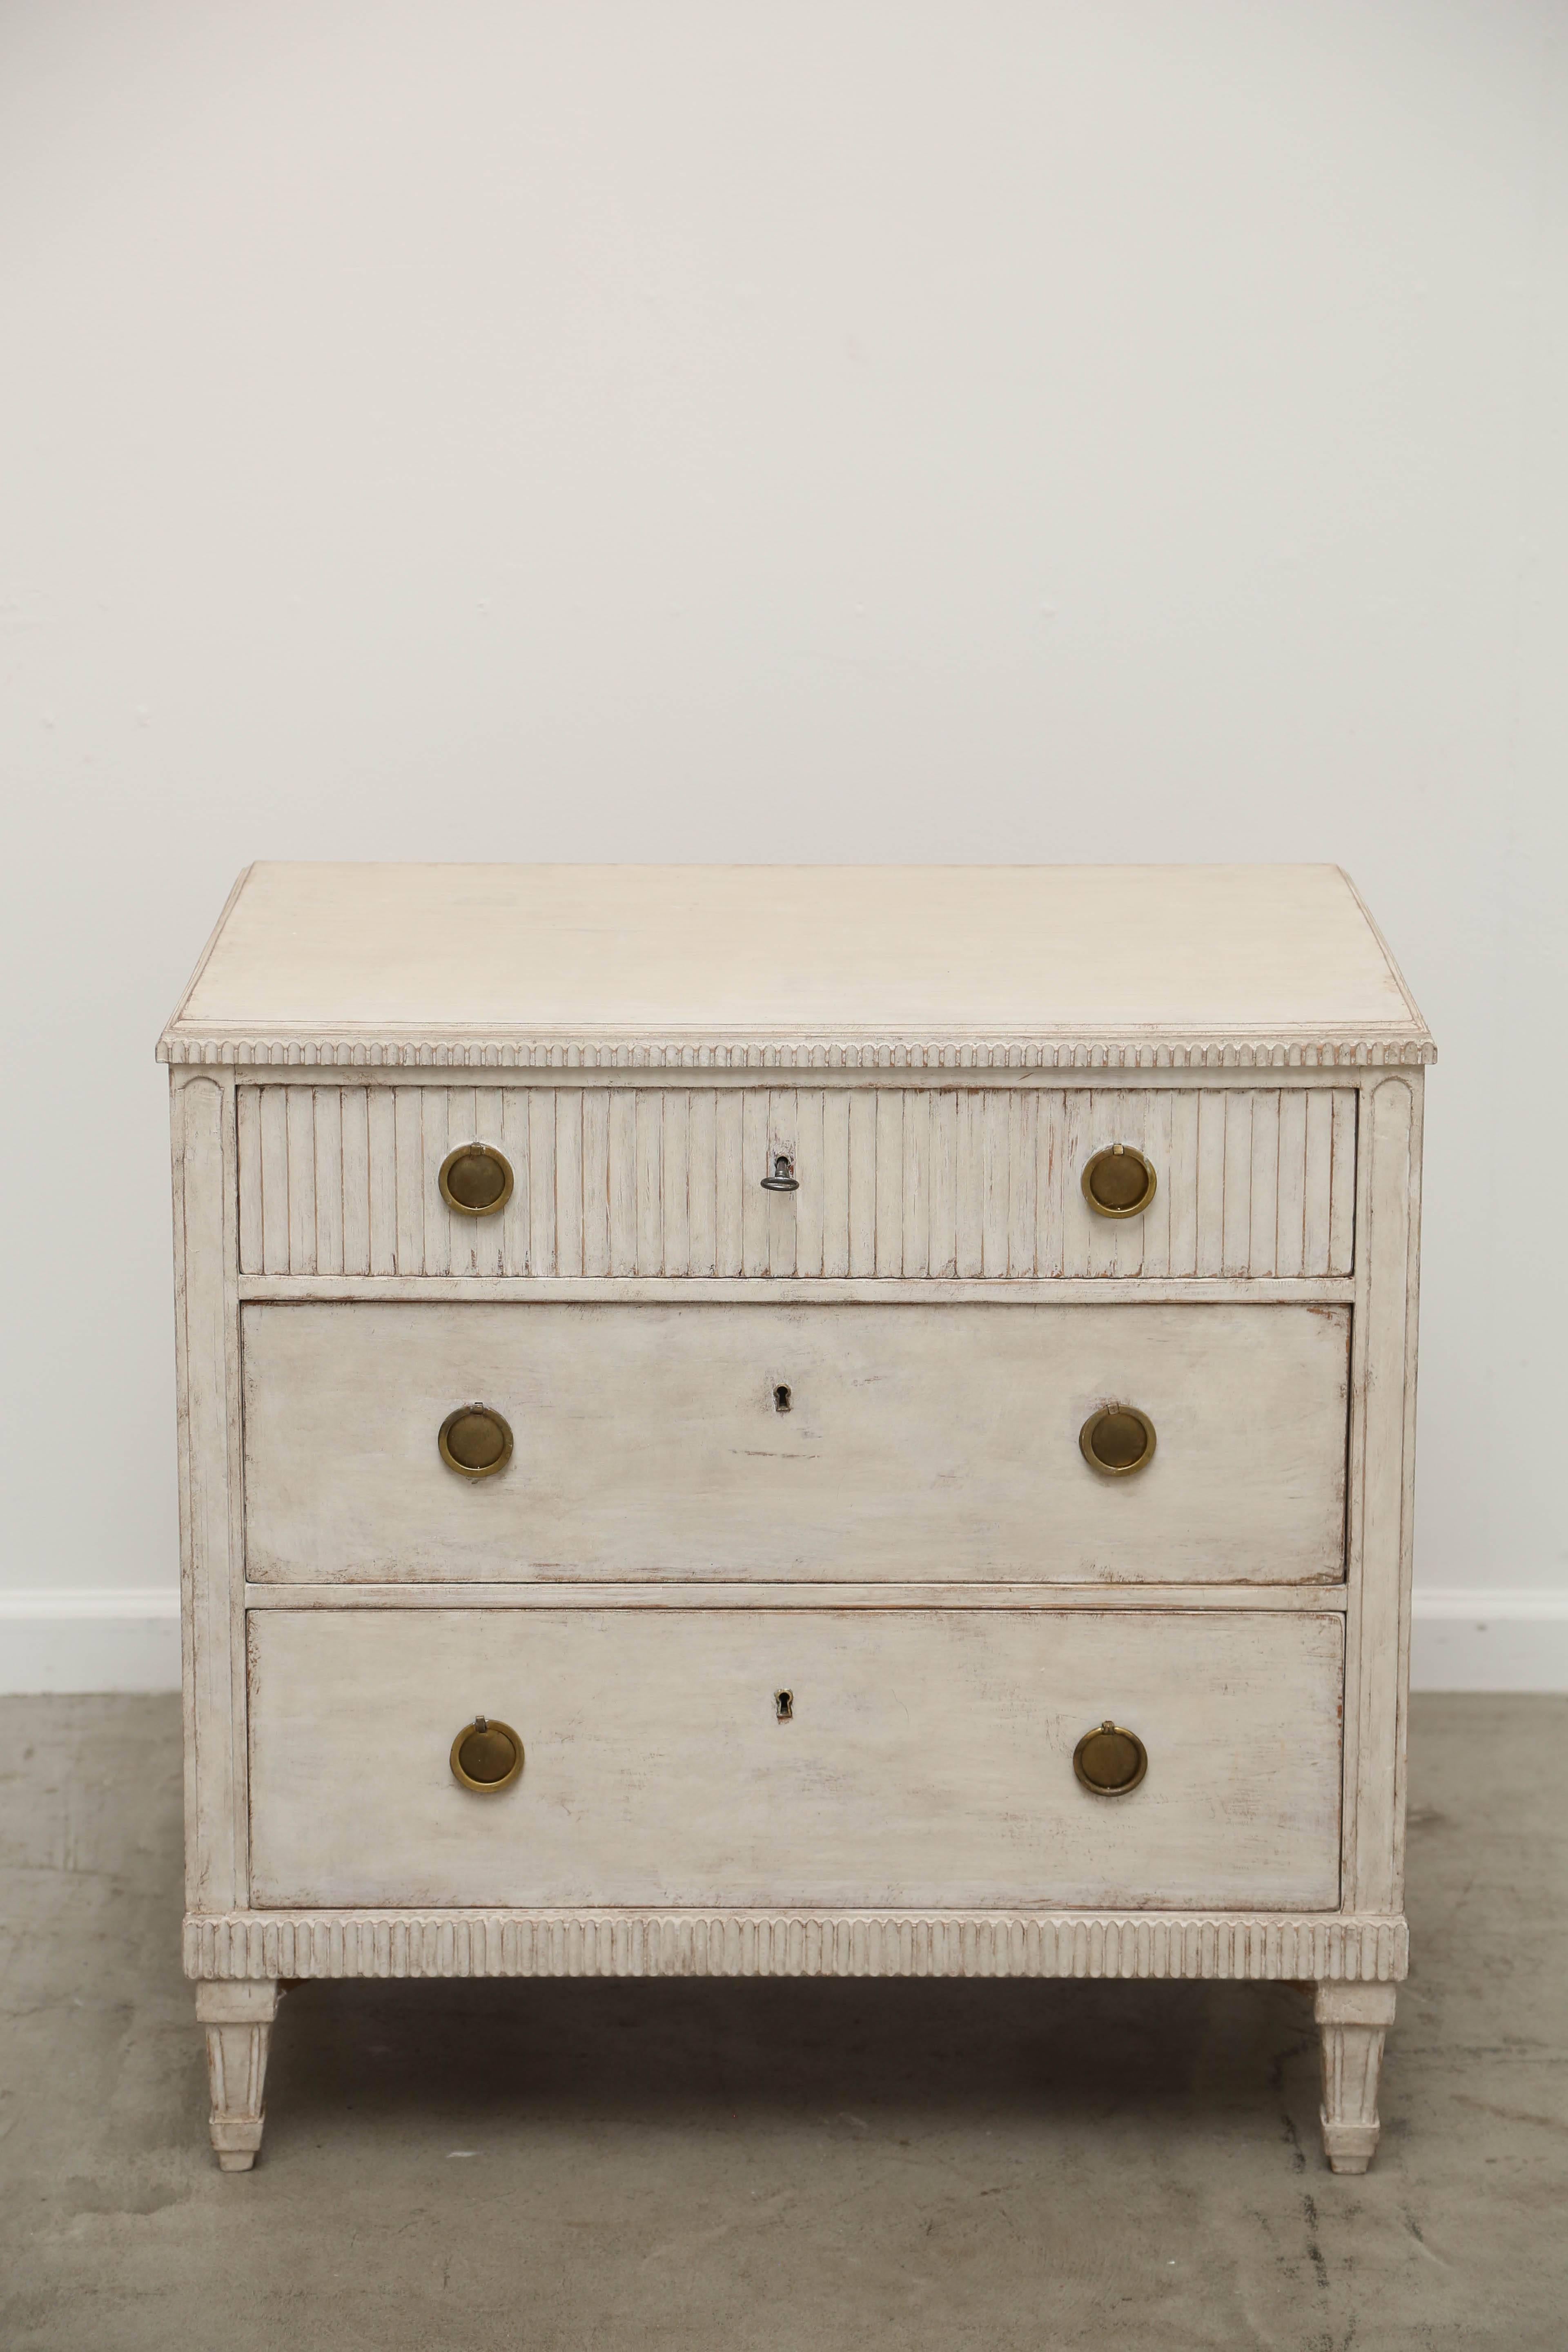 Antique Swedish Gustavian style chest painted Swedish distressed white/ Ivory
finish. Small carved fluted edge around the top, The top drawer has a reeded
carved face, two lower drawer have smooth face, there are brass key holes and
Key. Small